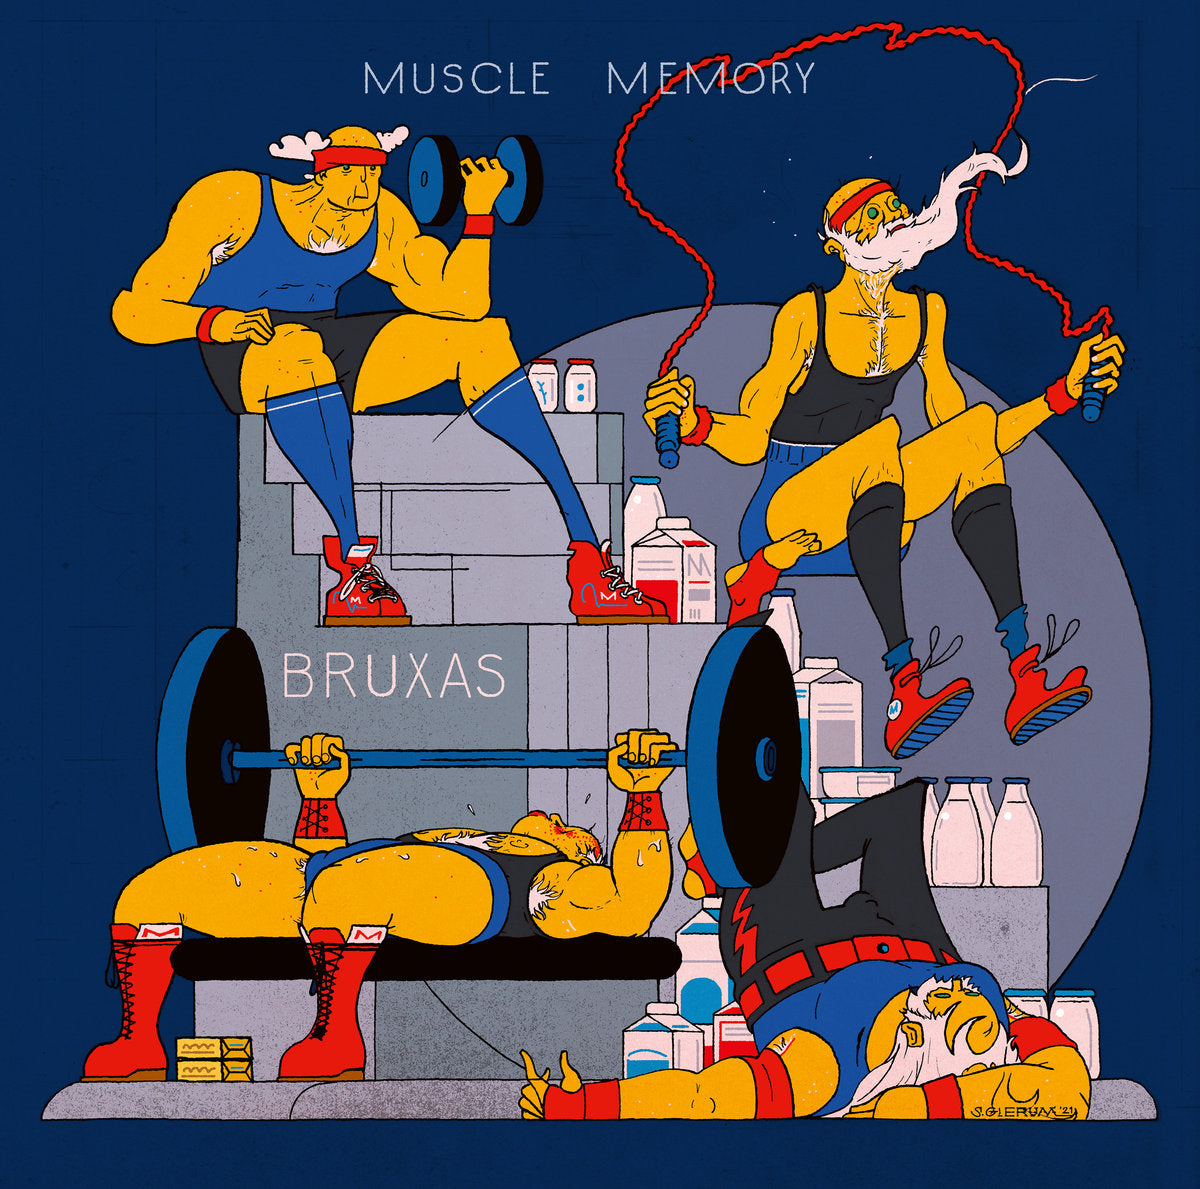 Muscle Memory (New LP)